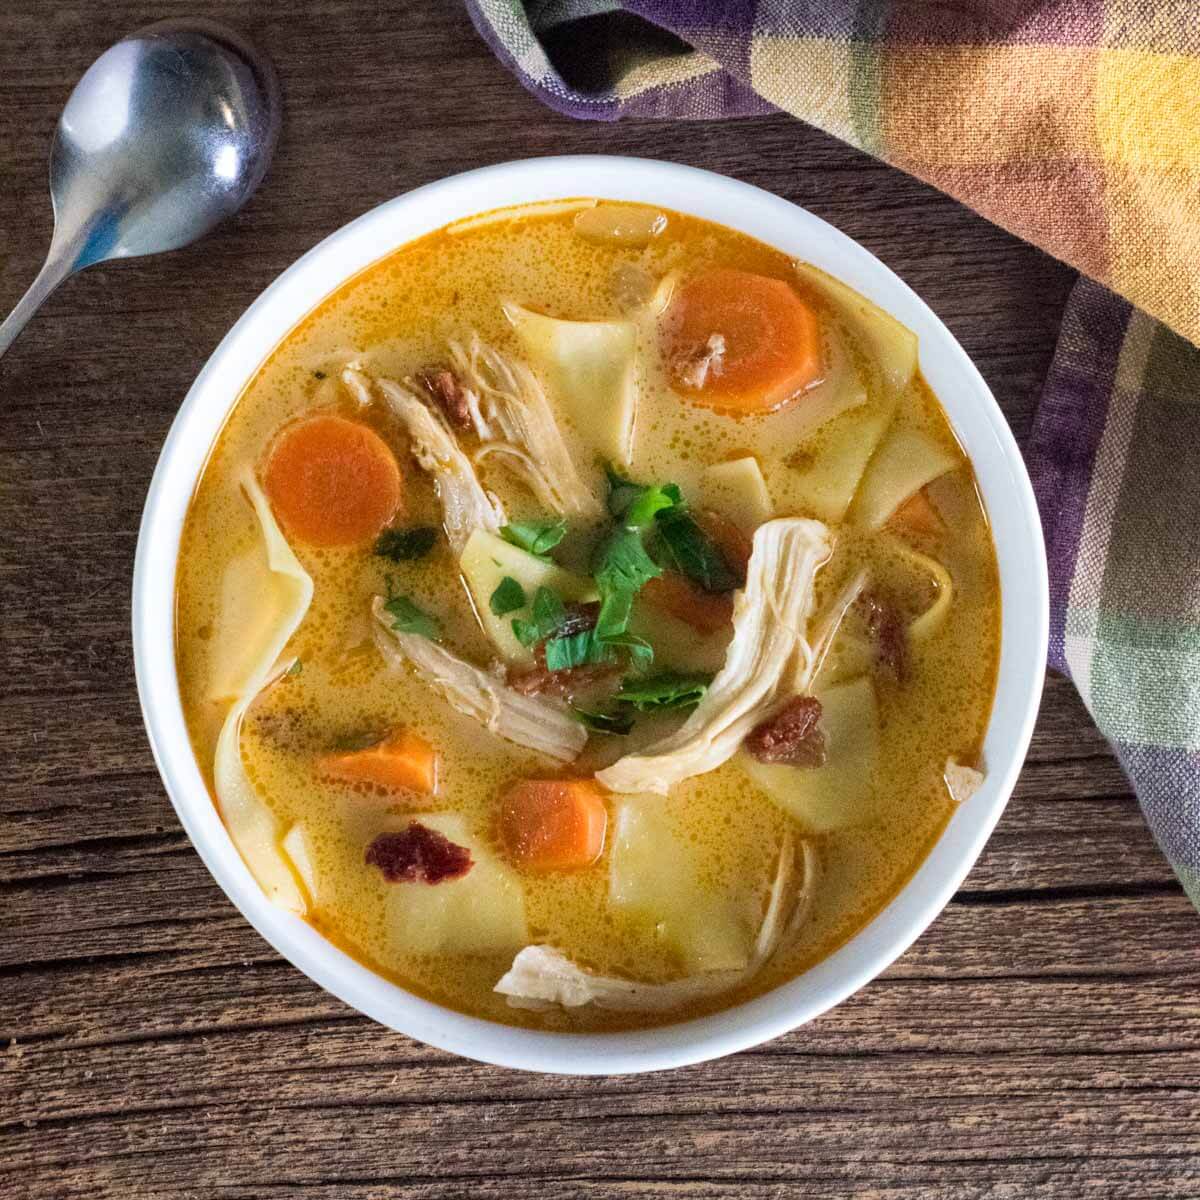 https://www.foxvalleyfoodie.com/wp-content/uploads/2020/08/spicy-chicken-noodle-soup-feature.jpg